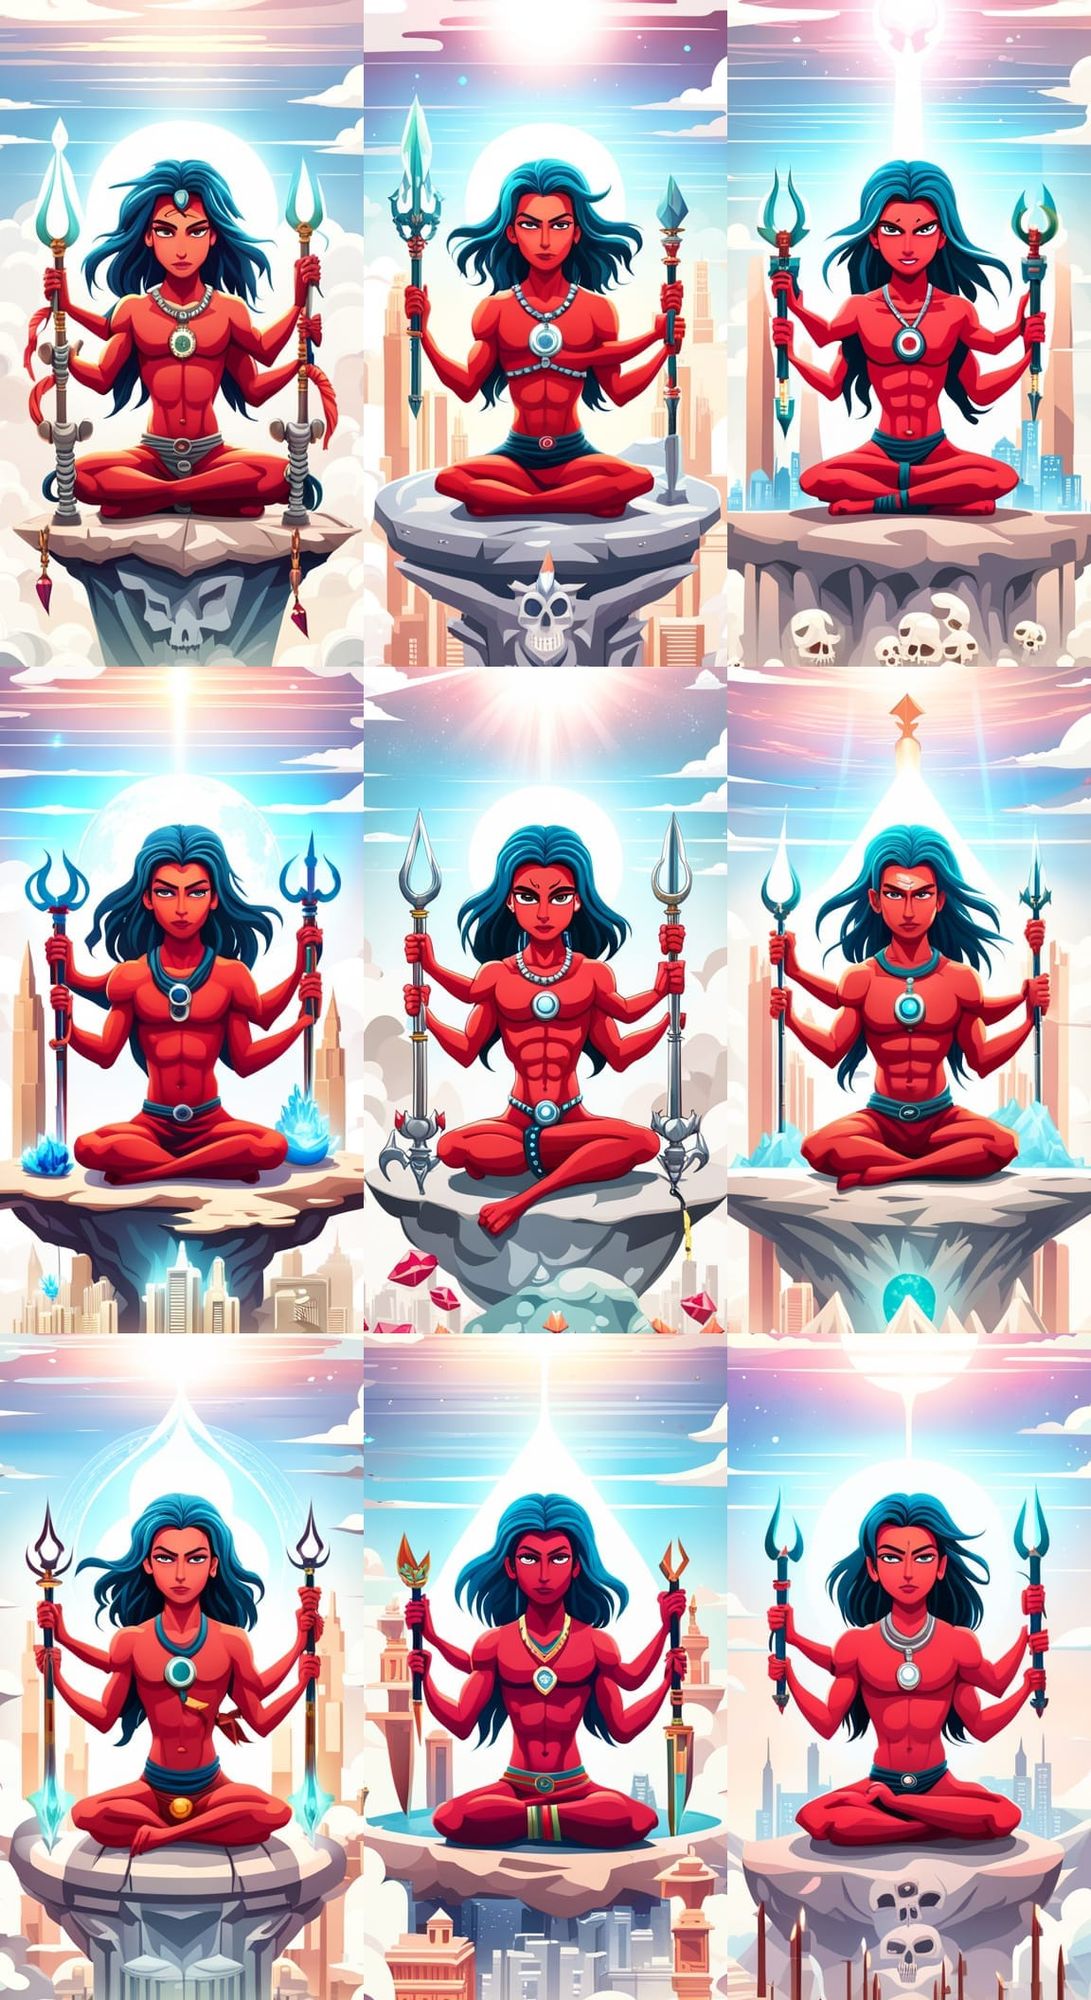 badass entry of lord shiva as an anime character